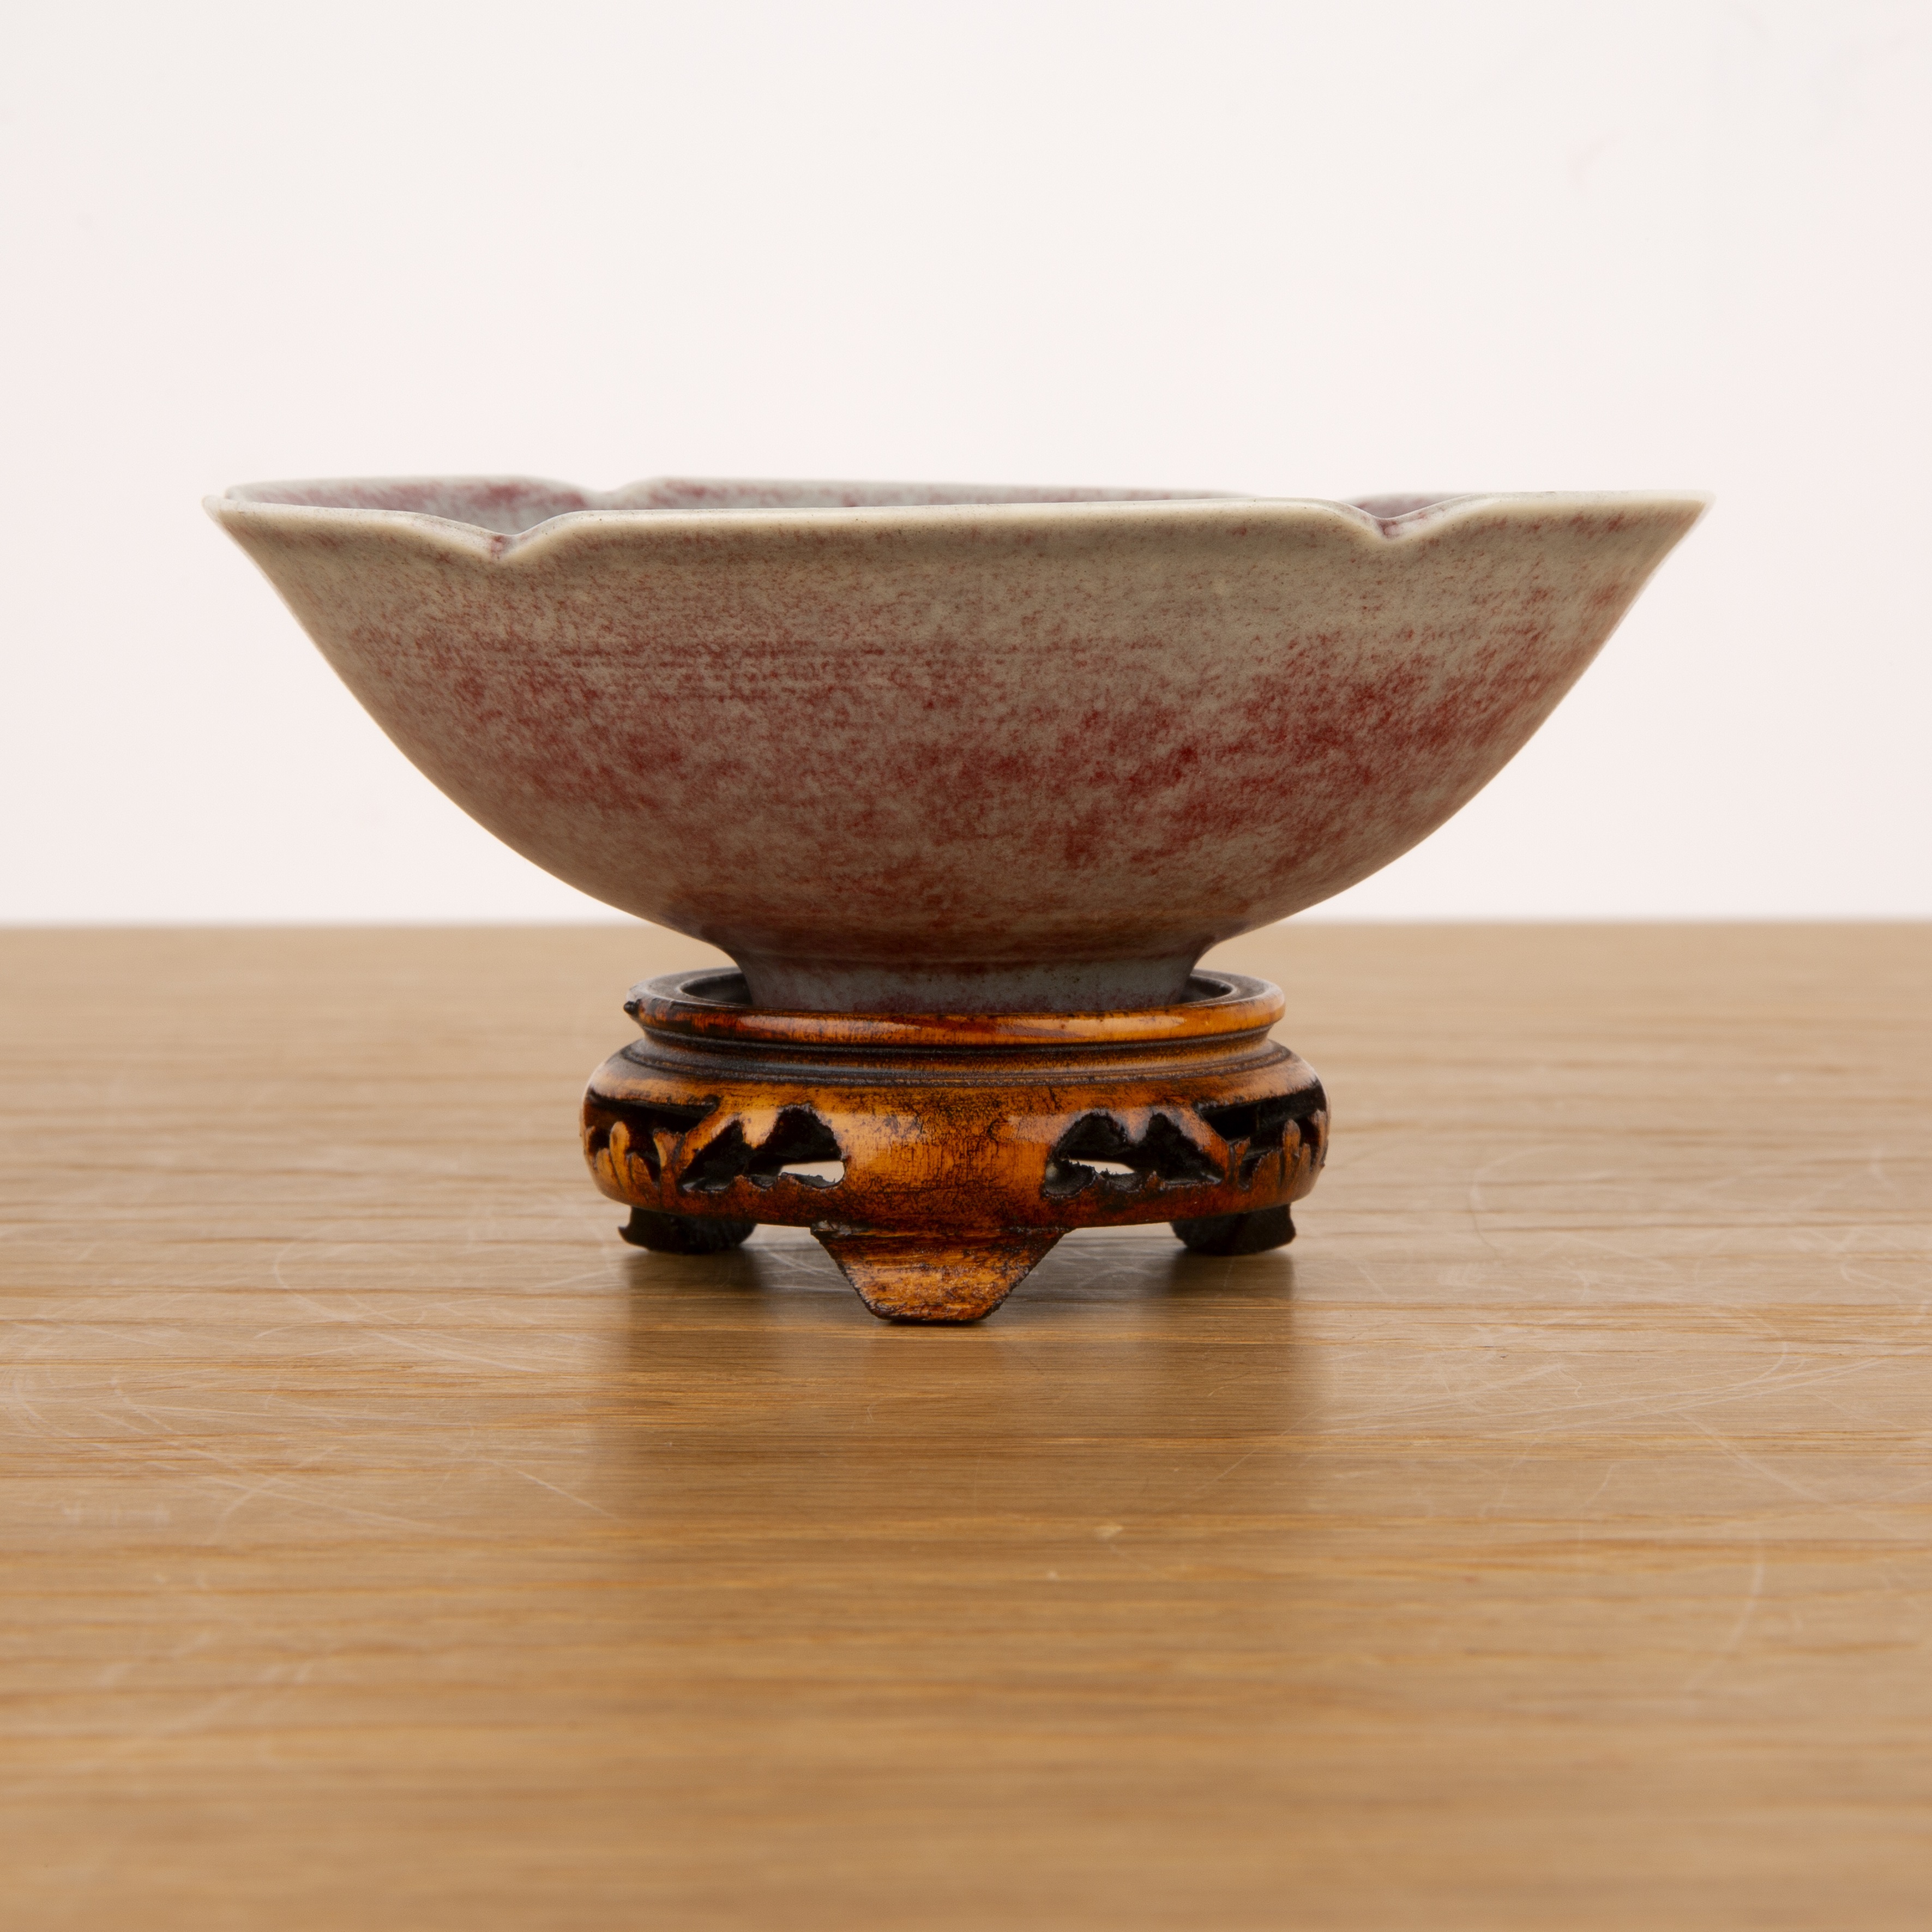 Peach bloom glaze petal-shaped bowl Chinese, 18th Century with a raised foot rim, 13cm diameter x - Image 2 of 6